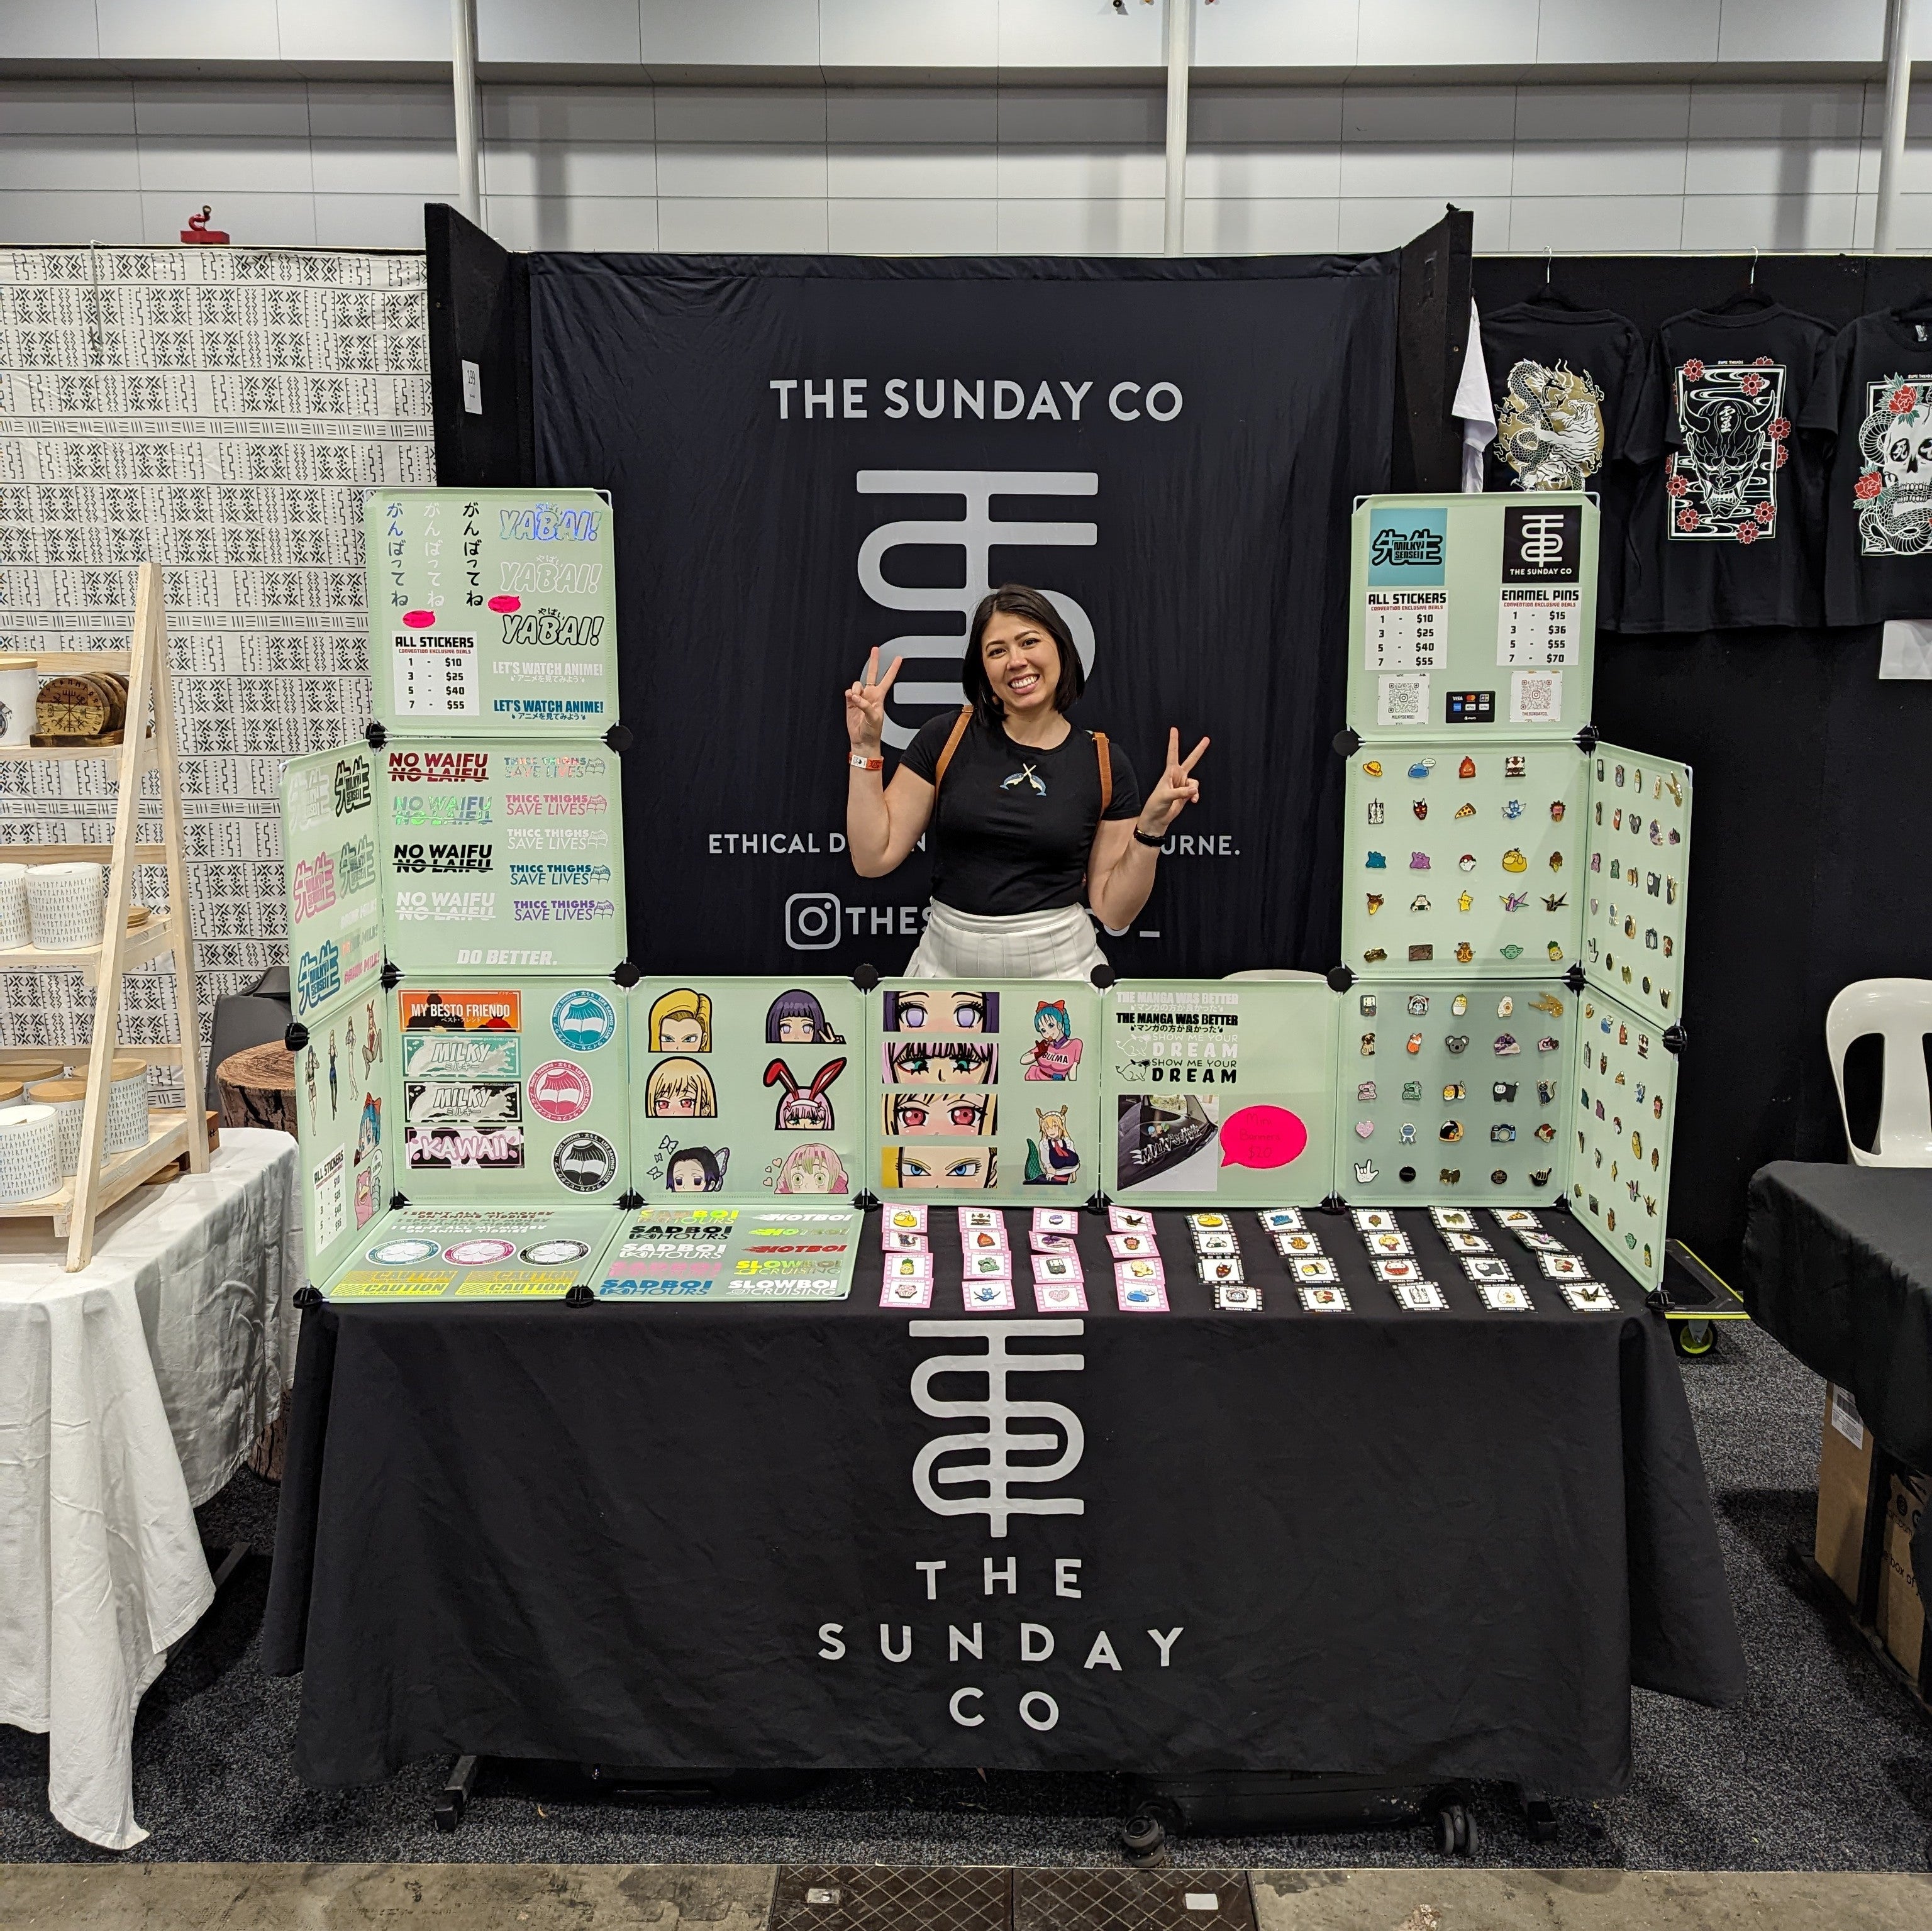 What's it like Exhibiting in Artist Alley - Australia?